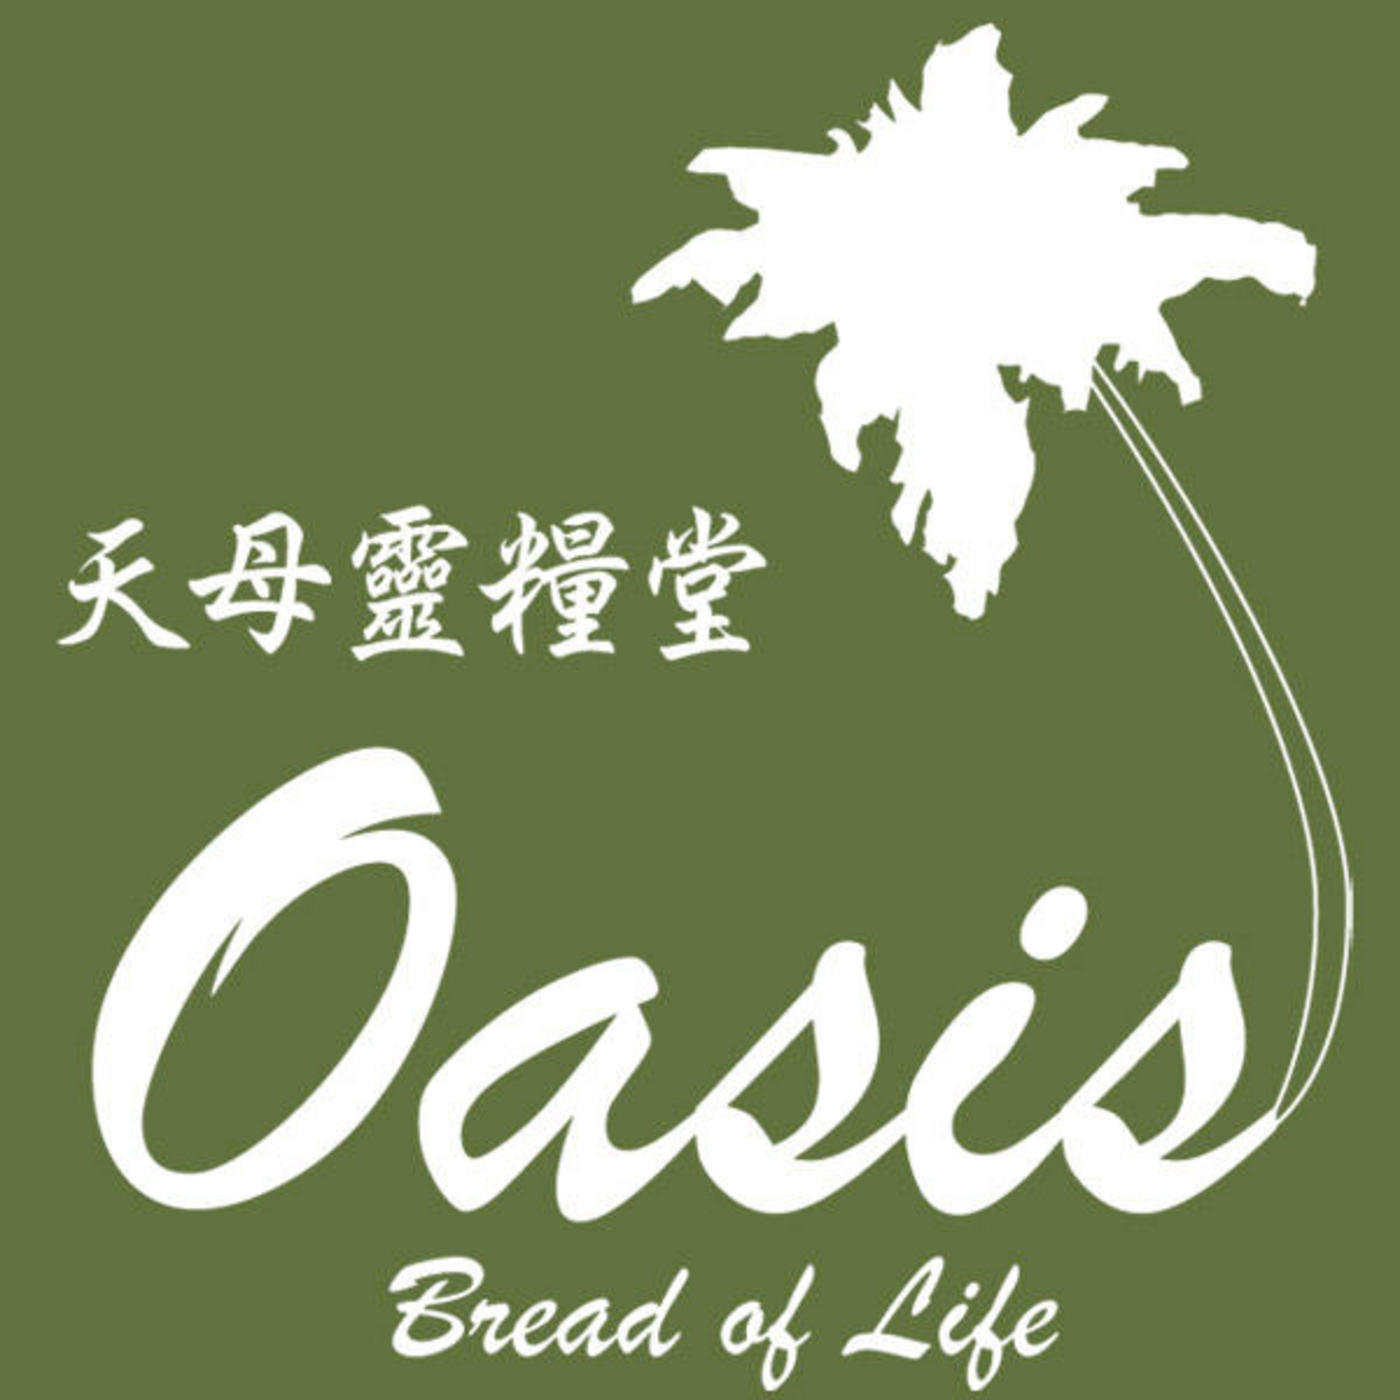 Sermons From Oasis - Bread Of Life